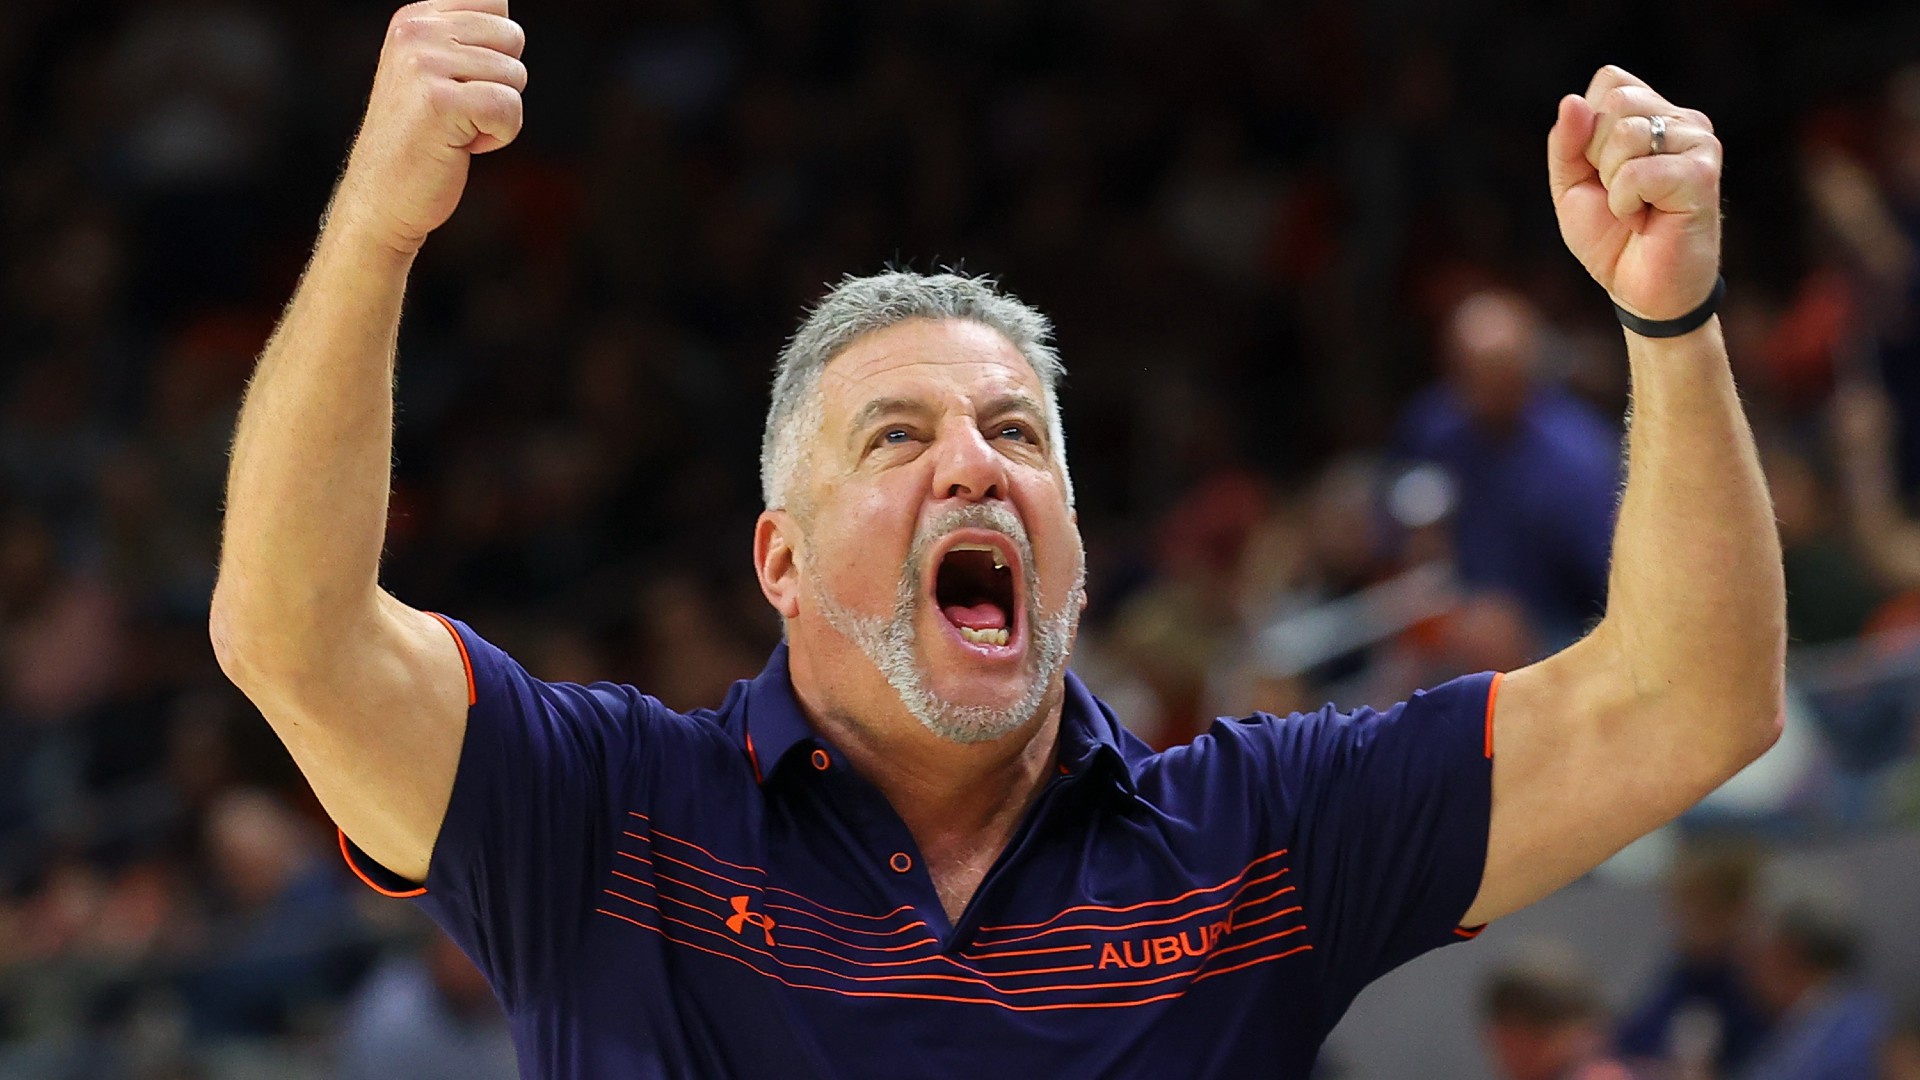 For Bruce Pearl to march from No. 1 Auburn to the head coaching job at Louisville would be madness